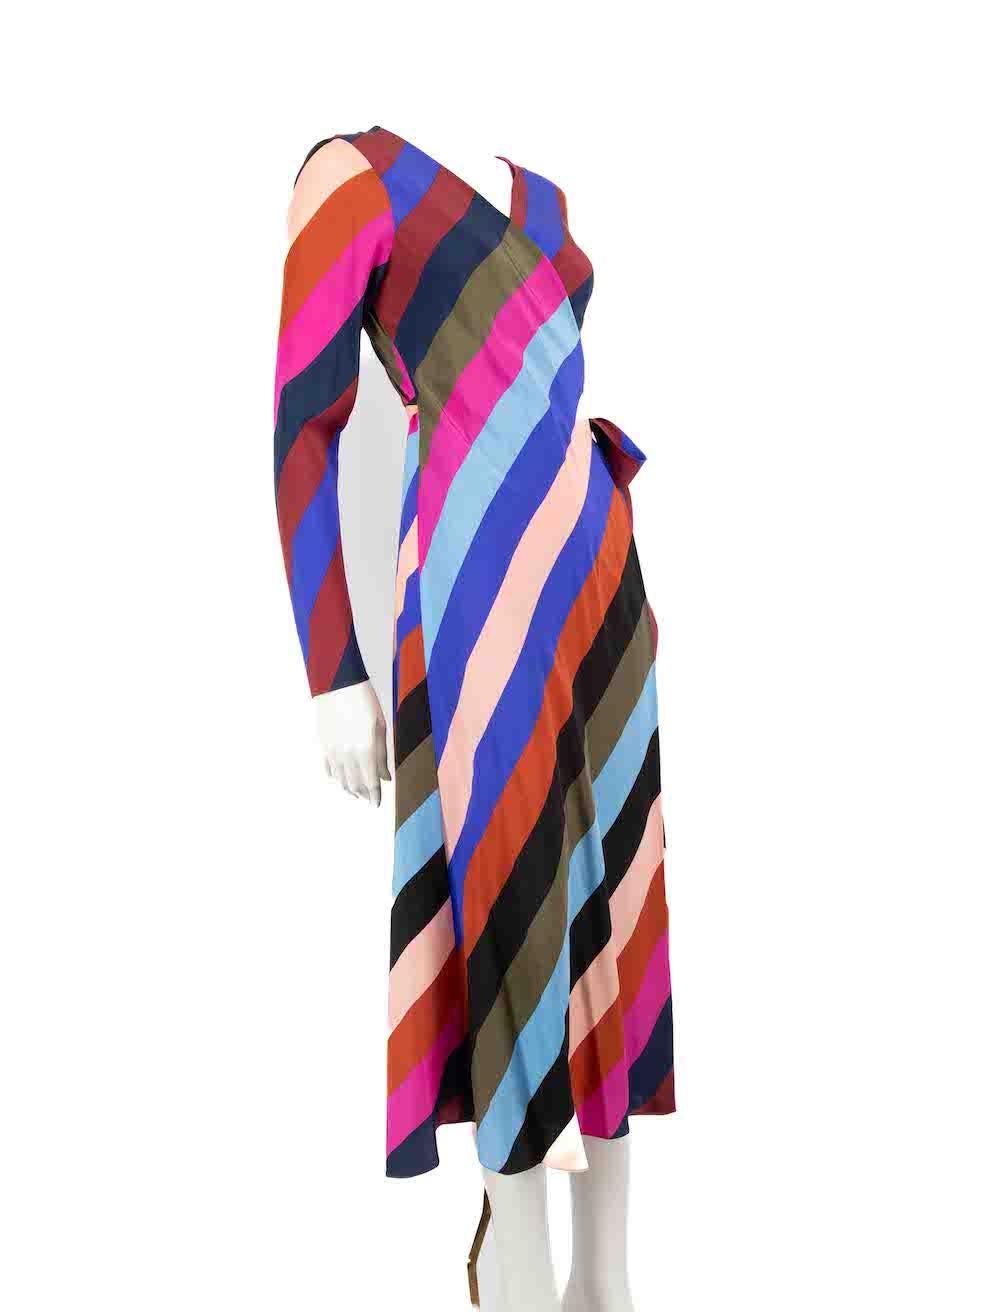 CONDITION is Never worn, with tags. No visible wear to the dress is evident on this new Diane Von Furstenberg designer resale item.
 
 
 
 Details
 
 
 Model: Carson
 
 Multicolour
 
 Silk
 
 Wrap dress
 
 Striped pattern
 
 Long sleeves
 
 Midi
 
